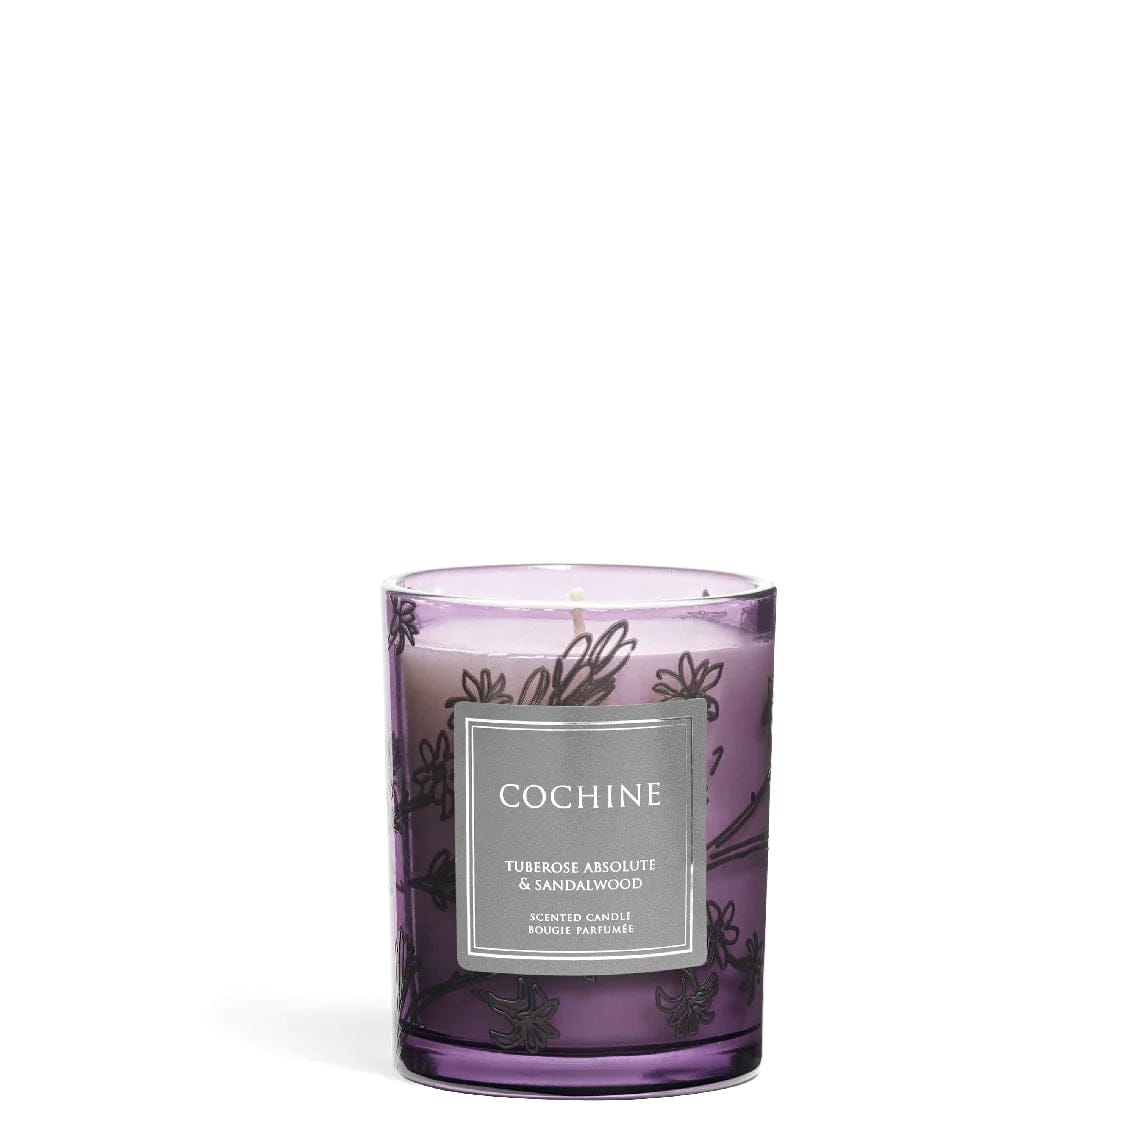 Cochine Home Fragrances of Cochines luxury scented candles and Cochine reed diffuers in Cochine Tuberose & Sandalwood Candle